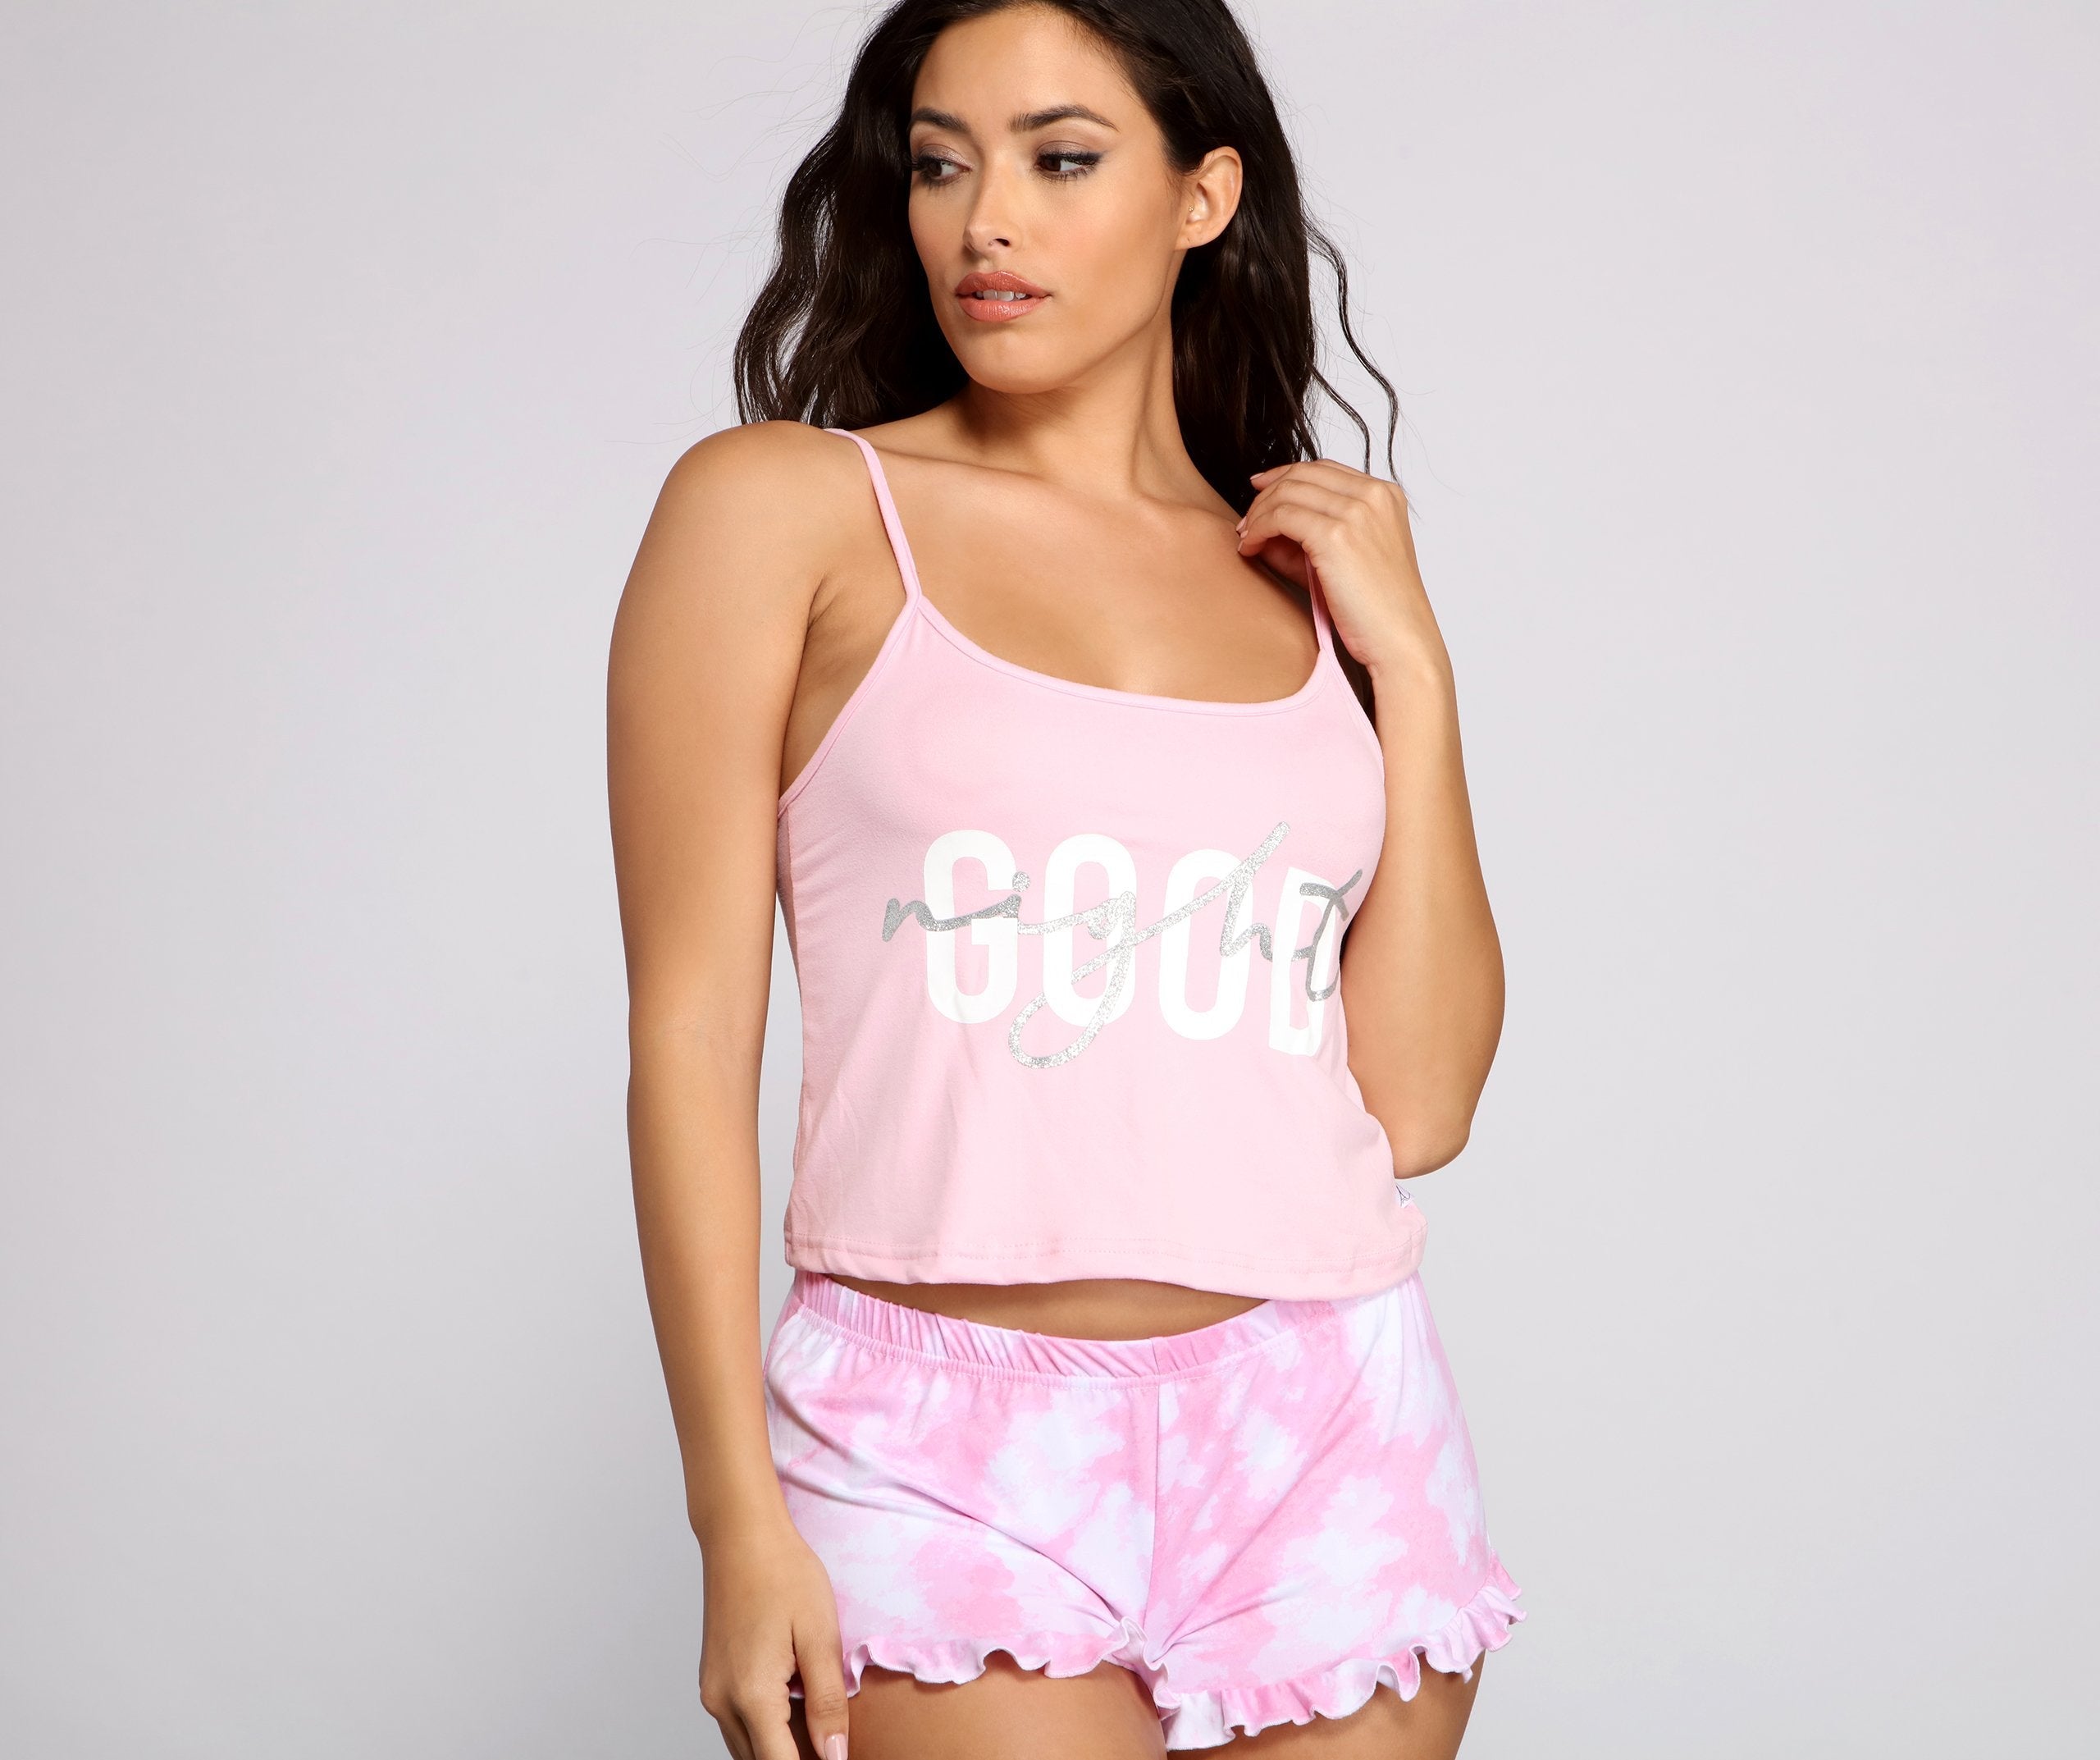 Cloud 9 Tie Dye Robe and Pajama Cami With Shorts Set